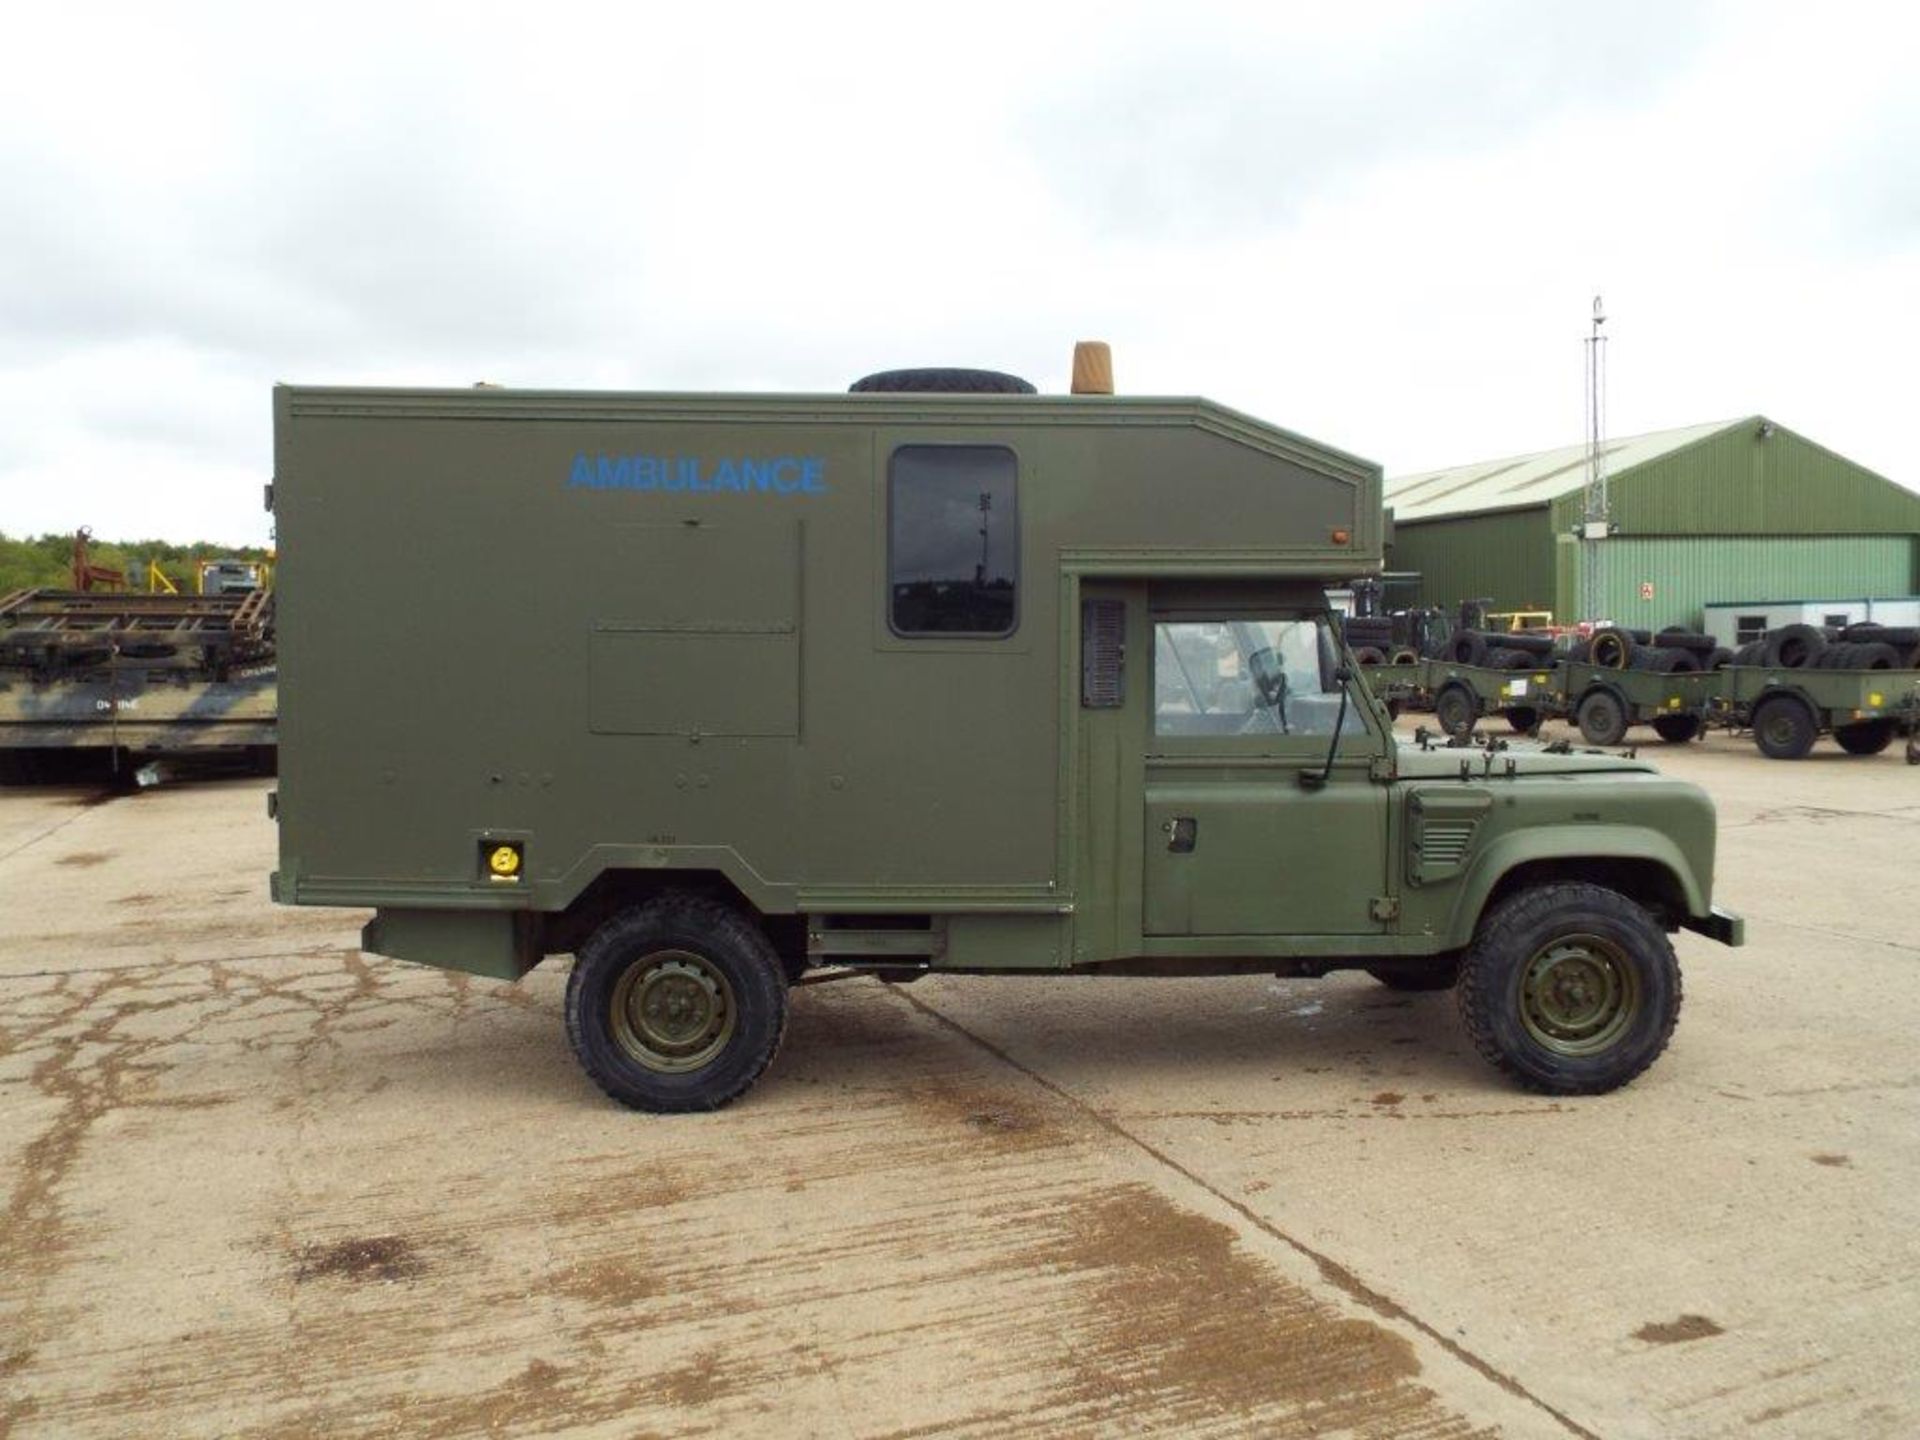 Military Specification Land Rover Wolf 130 Ambulance - Image 8 of 24